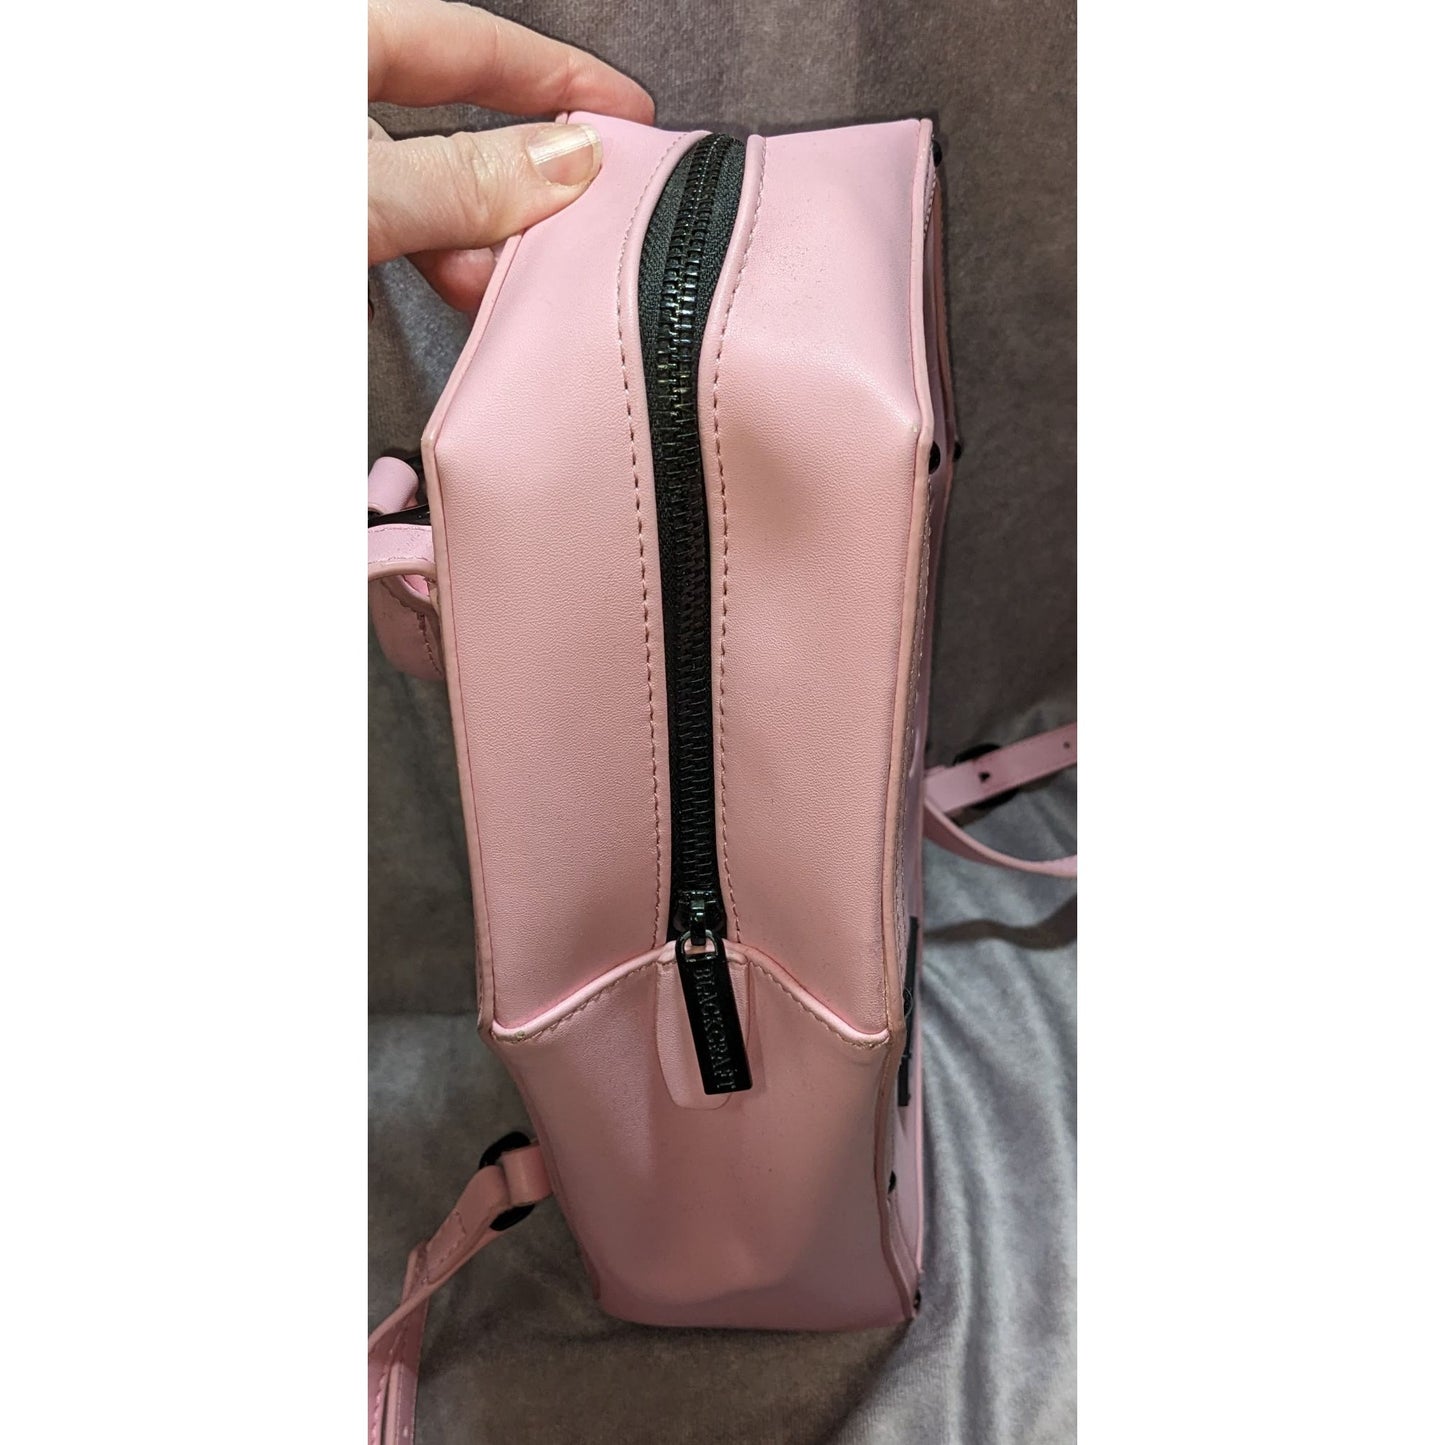 Black Craft Never Trust The Living Pink Coffin Backpack Purse